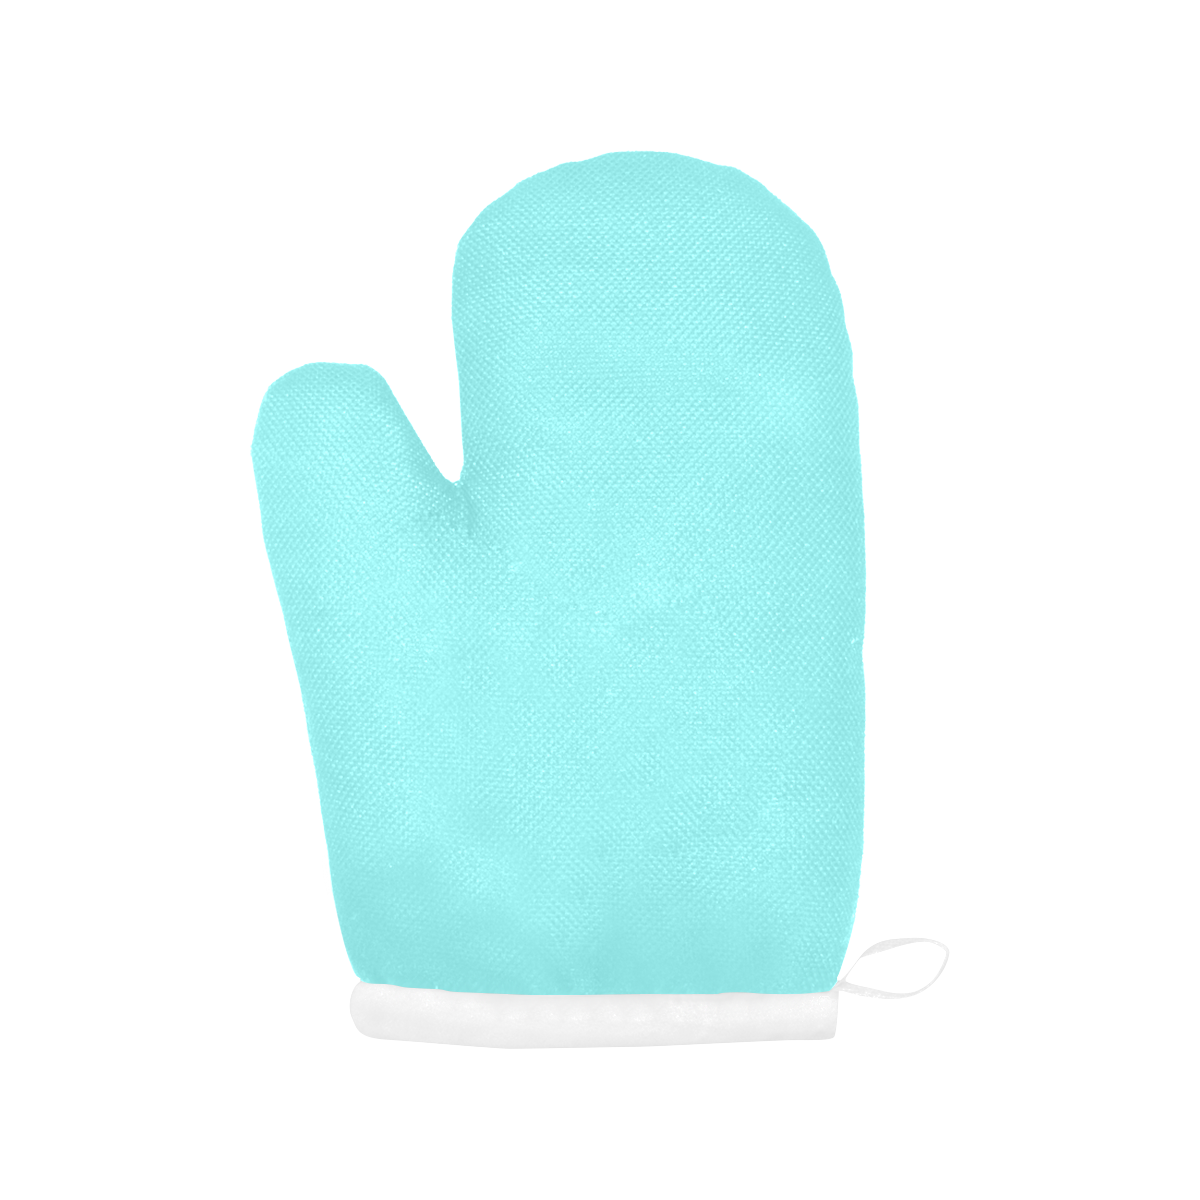 color ice blue Oven Mitt